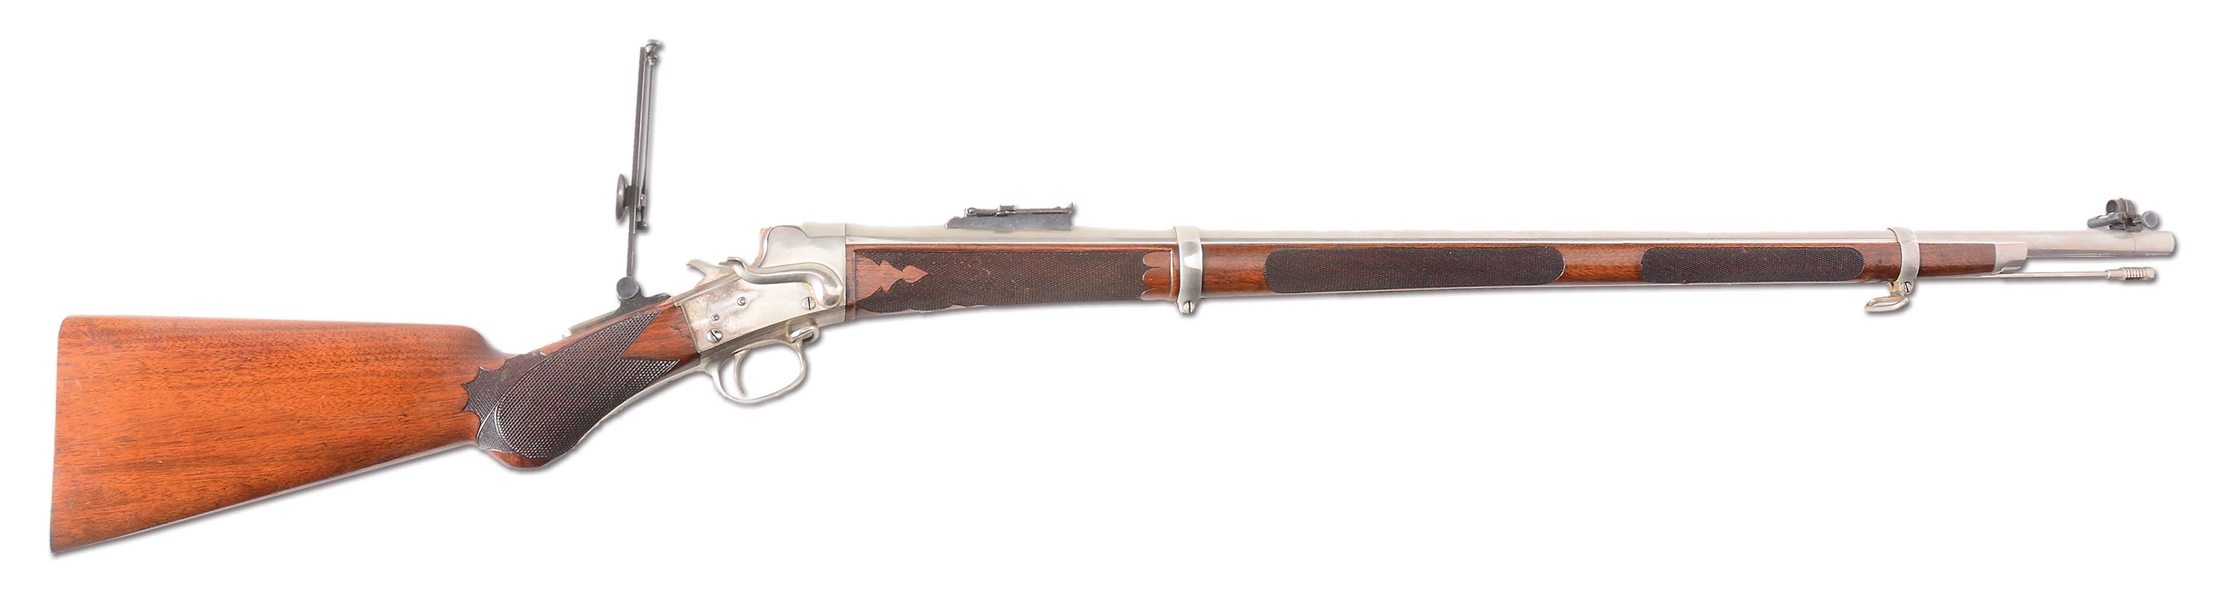 (A) EXTREMELY RARE SPECIAL ORDER REMINGTON HEPBURN SPECIAL MILITARY CREEDMOR "ANY RIFLE".